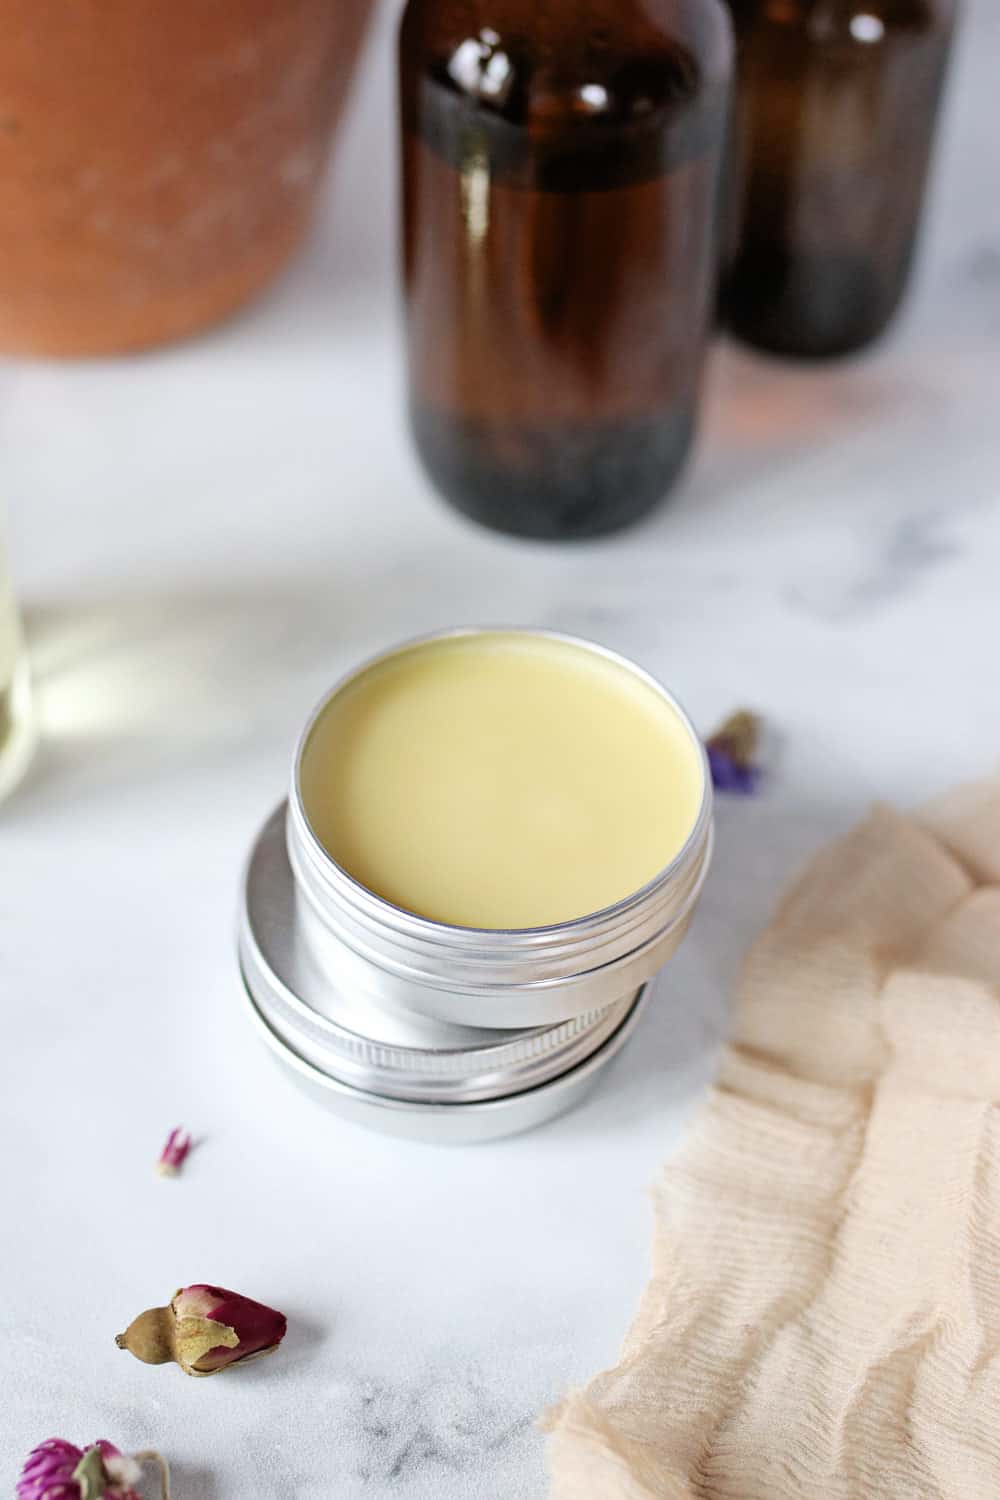 How to make solid perfume with essential oils